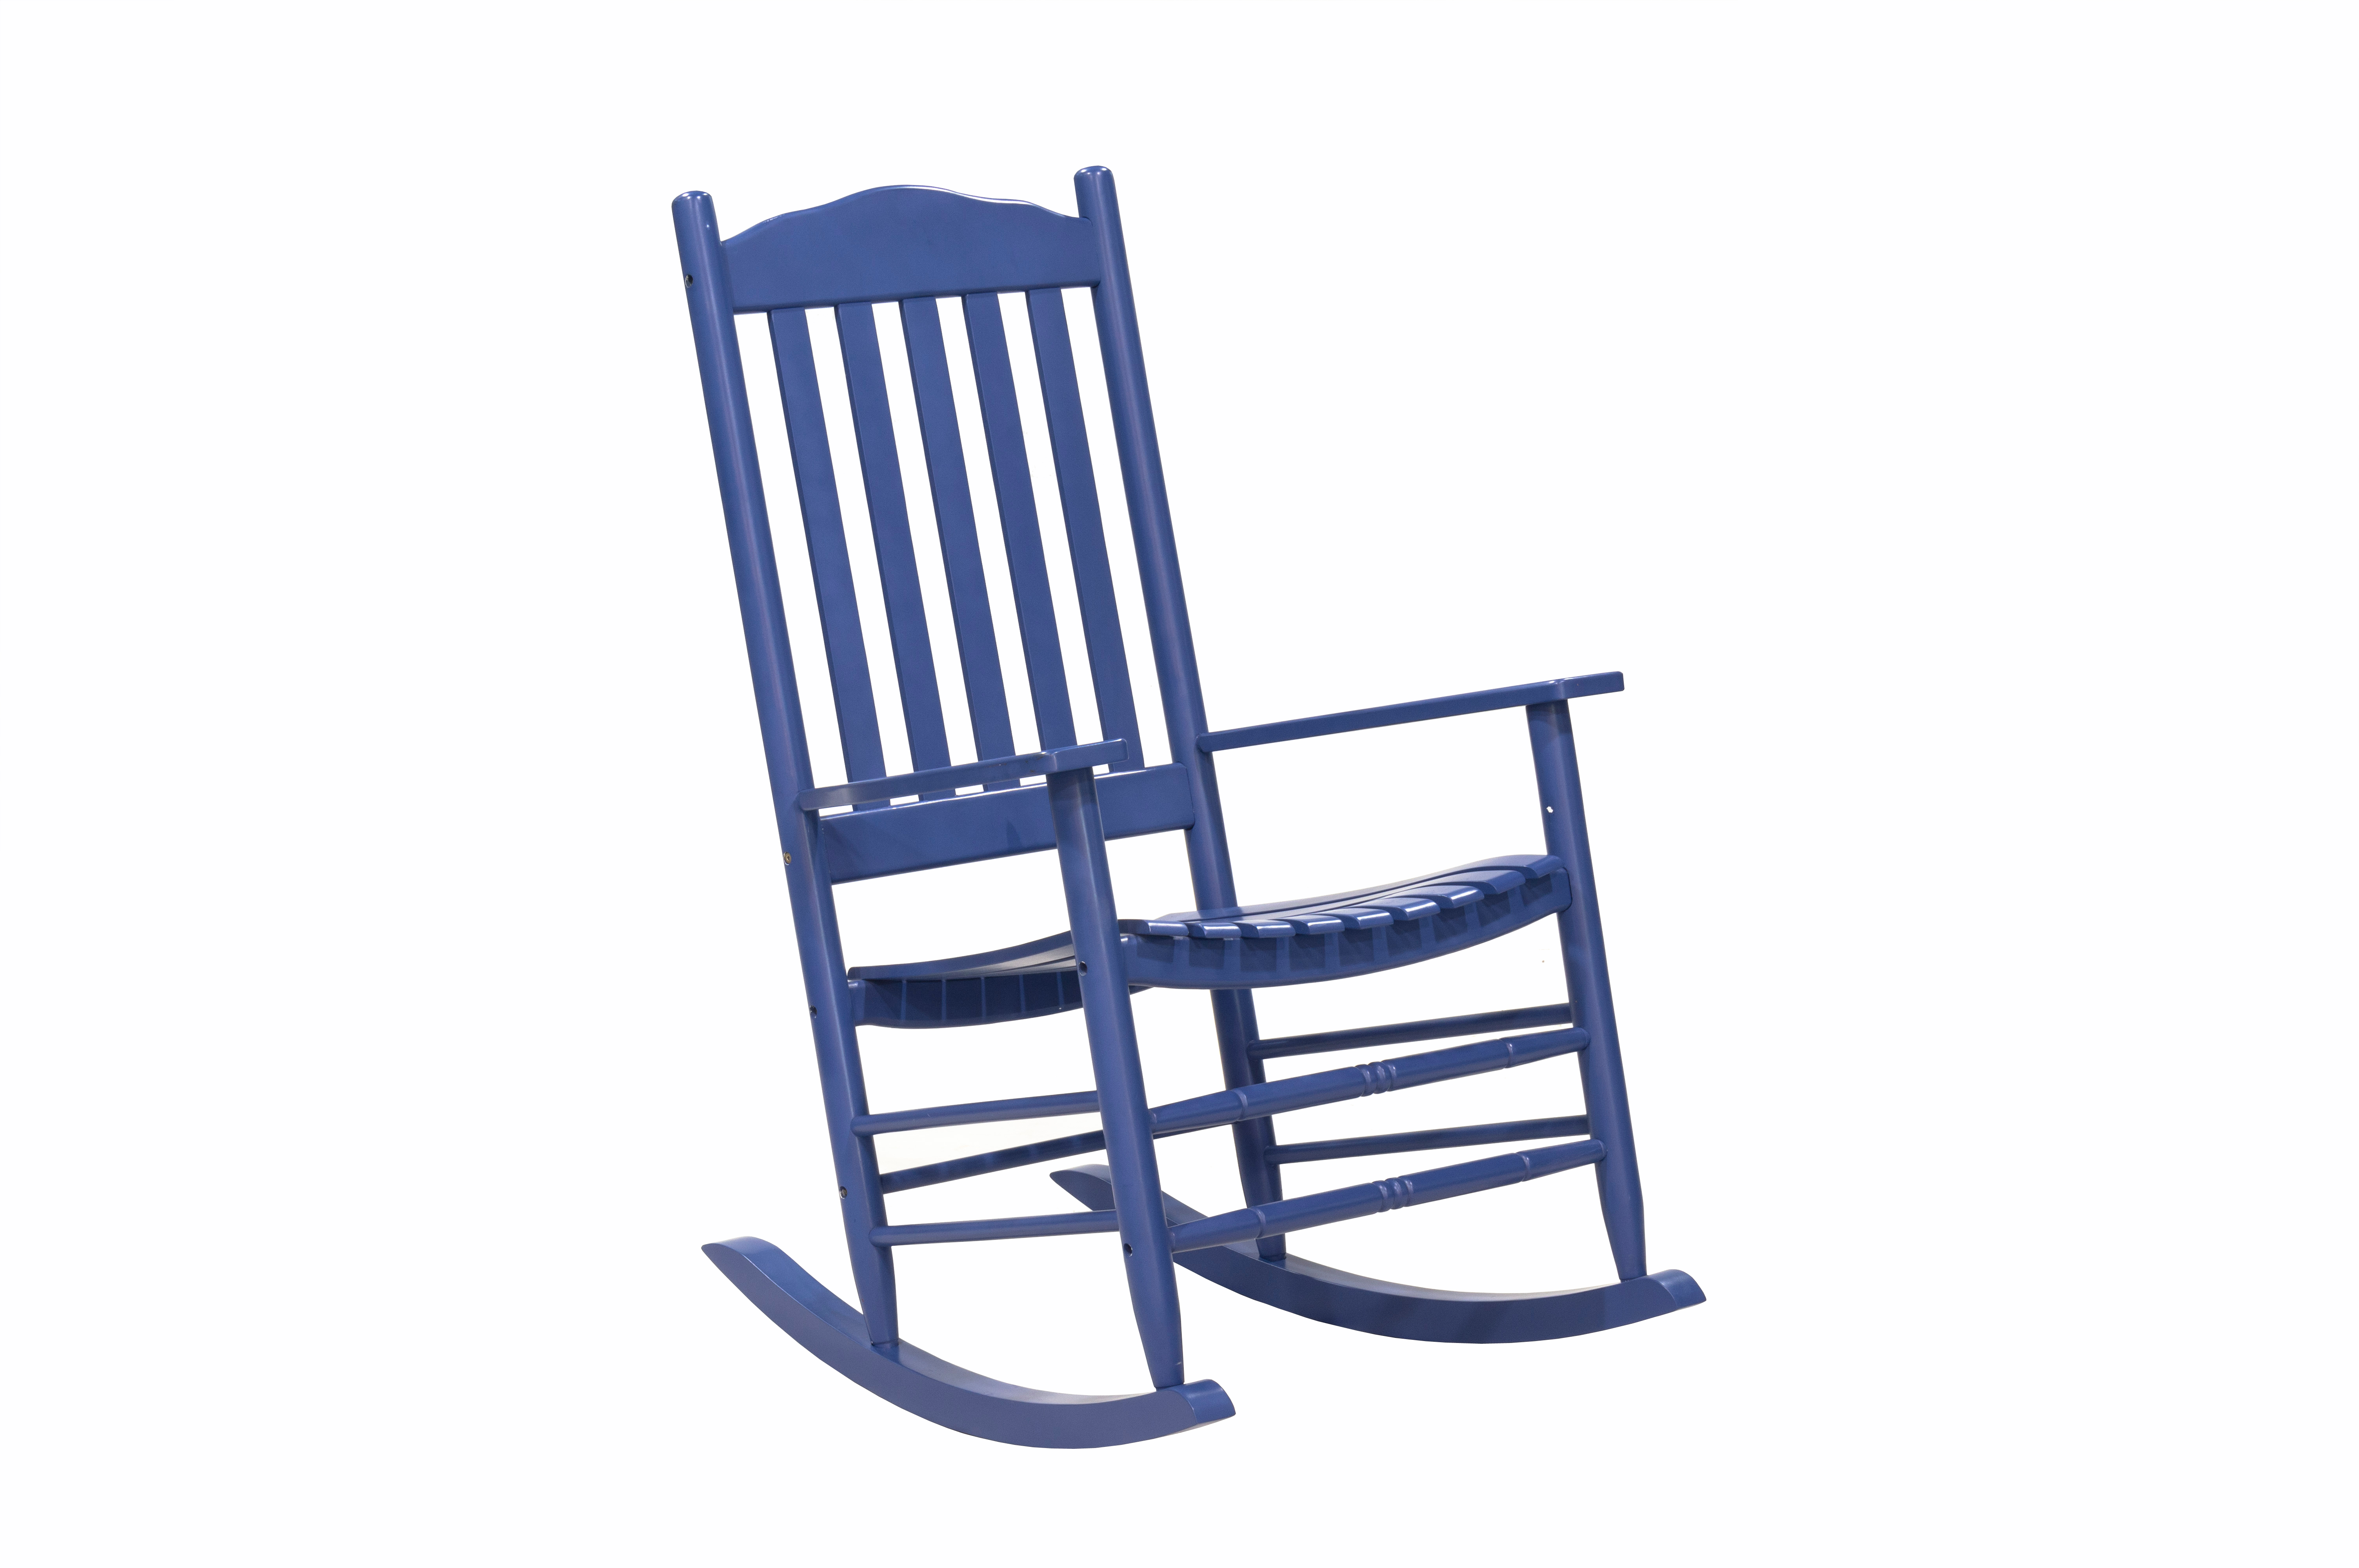 Outdoor Patio Garden Furniture 3-Piece Wood Porch Rocking Chair Set, Weather Resistant Finish,2 Rocking Chairs and 1 Side Table-Blue - image 5 of 11